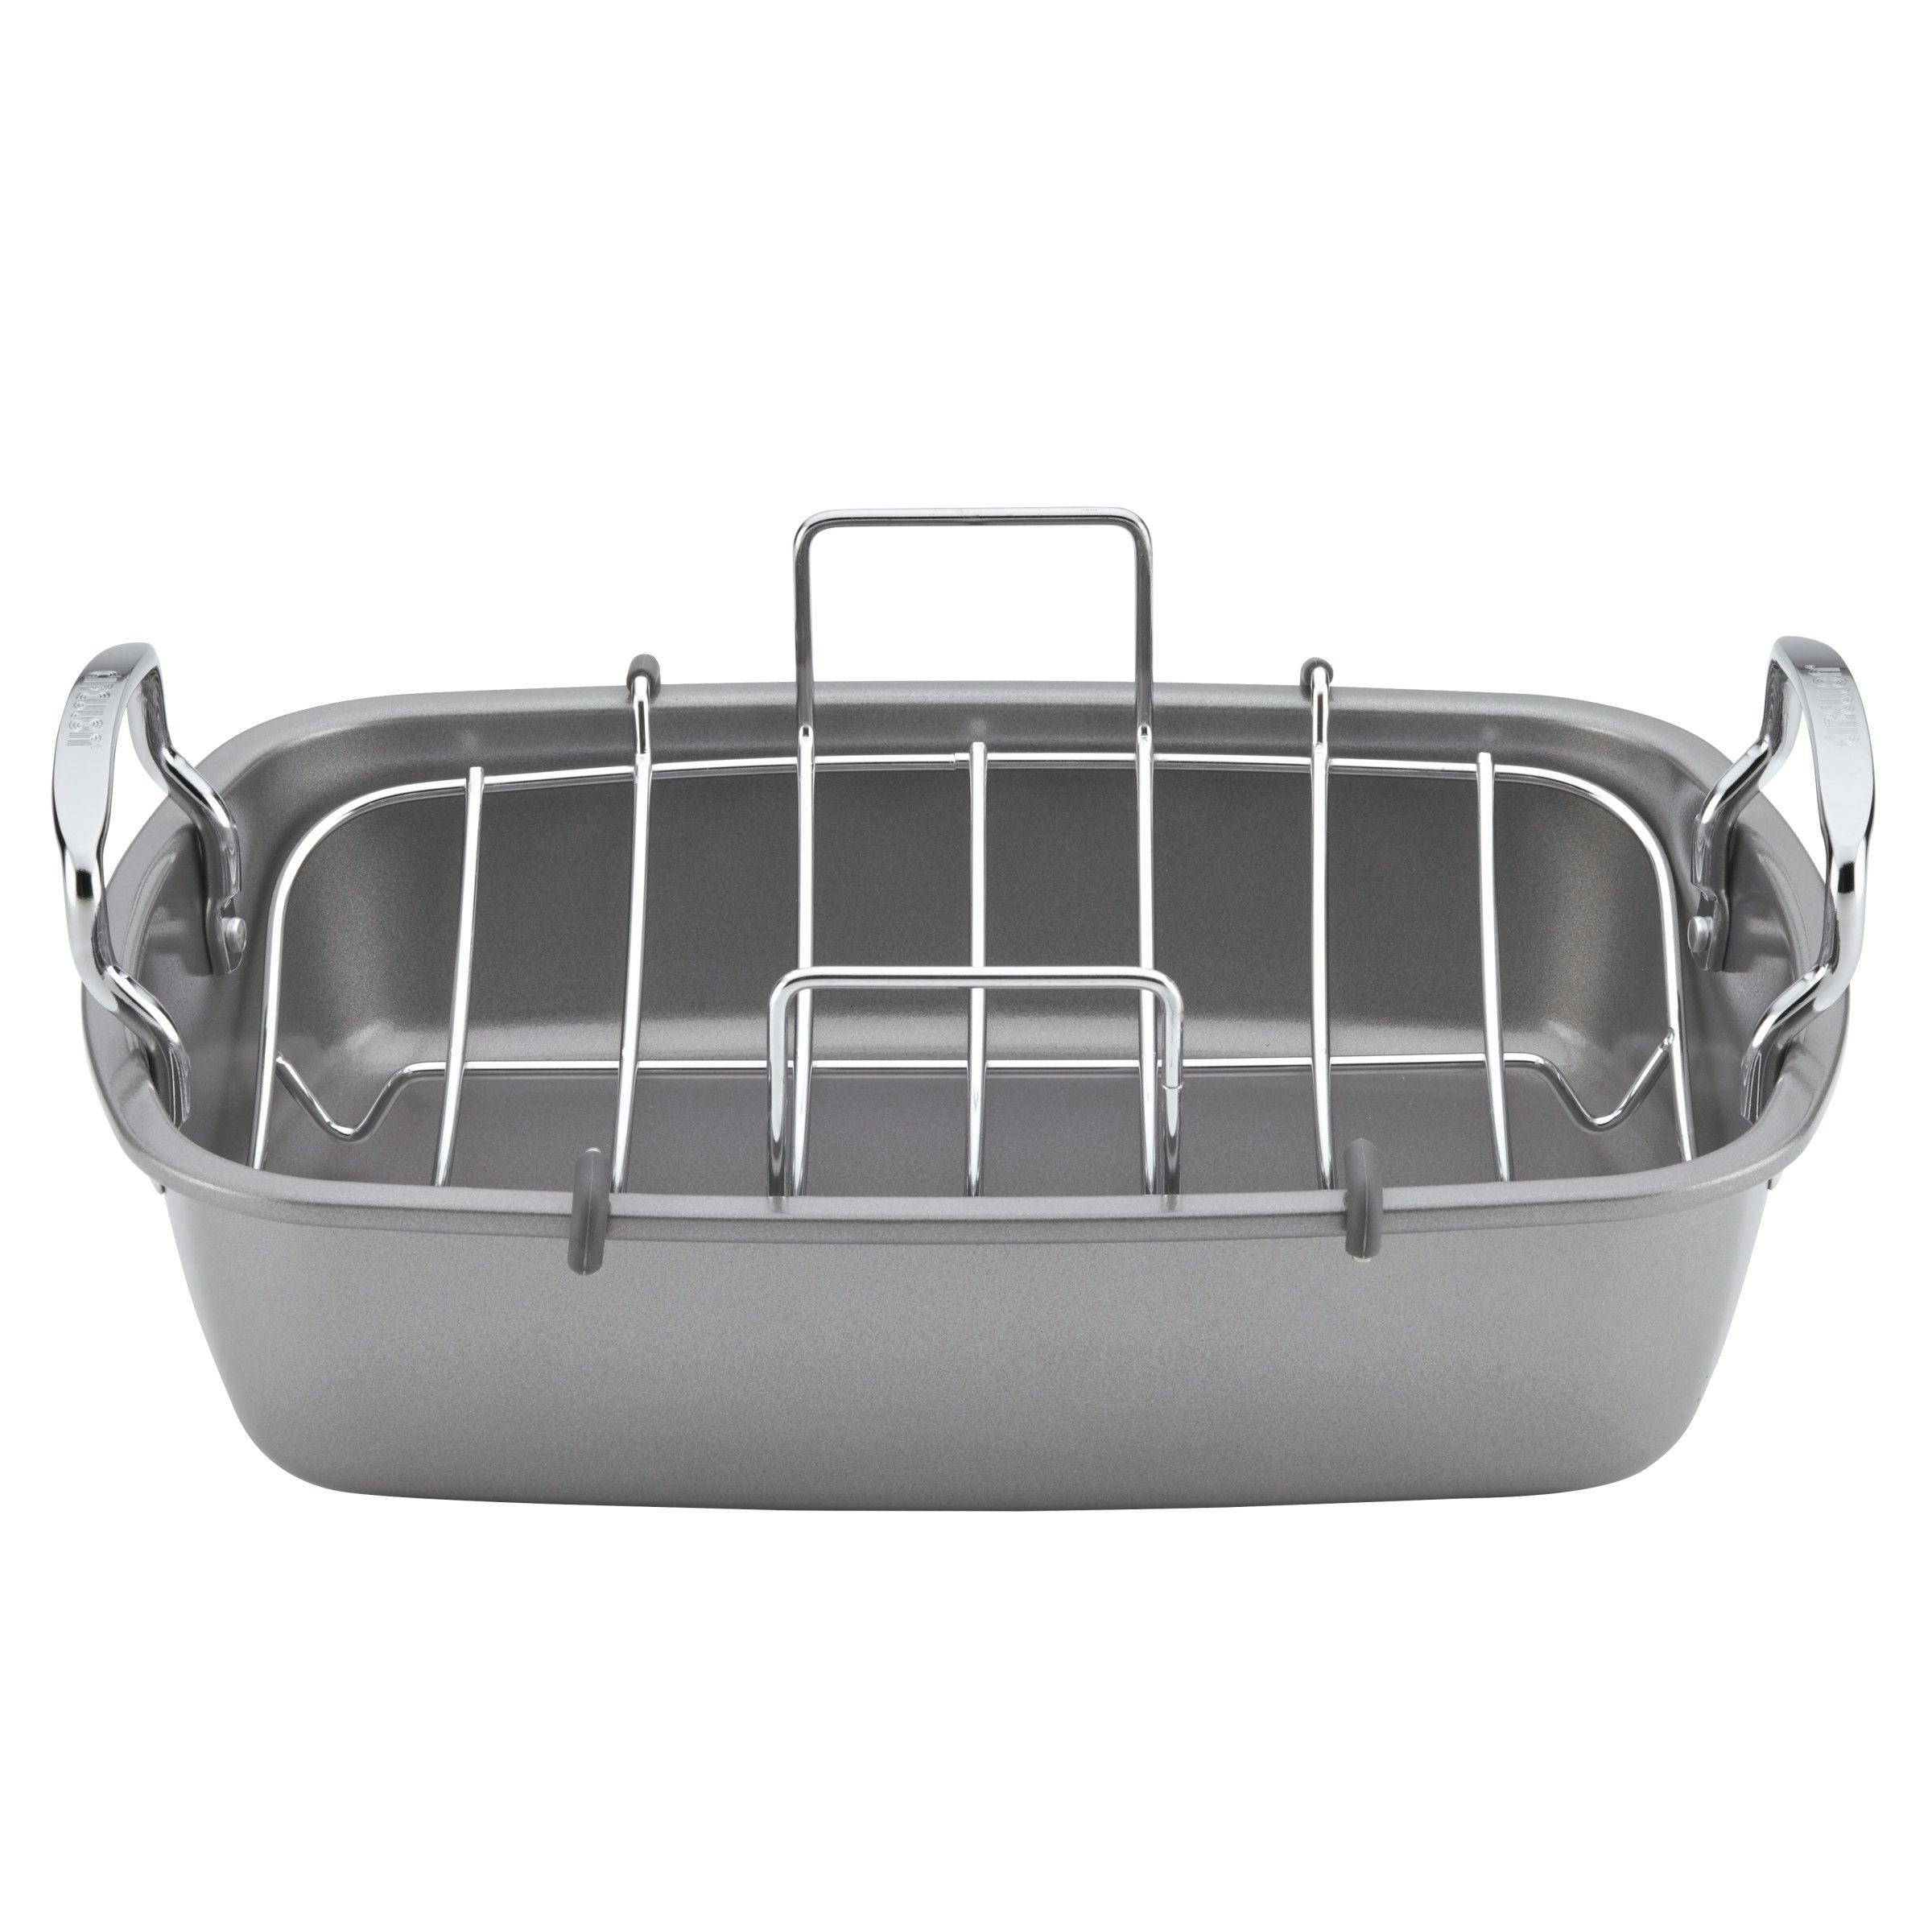 Circulon Total Bakeware Nonstick Roaster with Rack, 17-Inch x 13-Inch, Gray